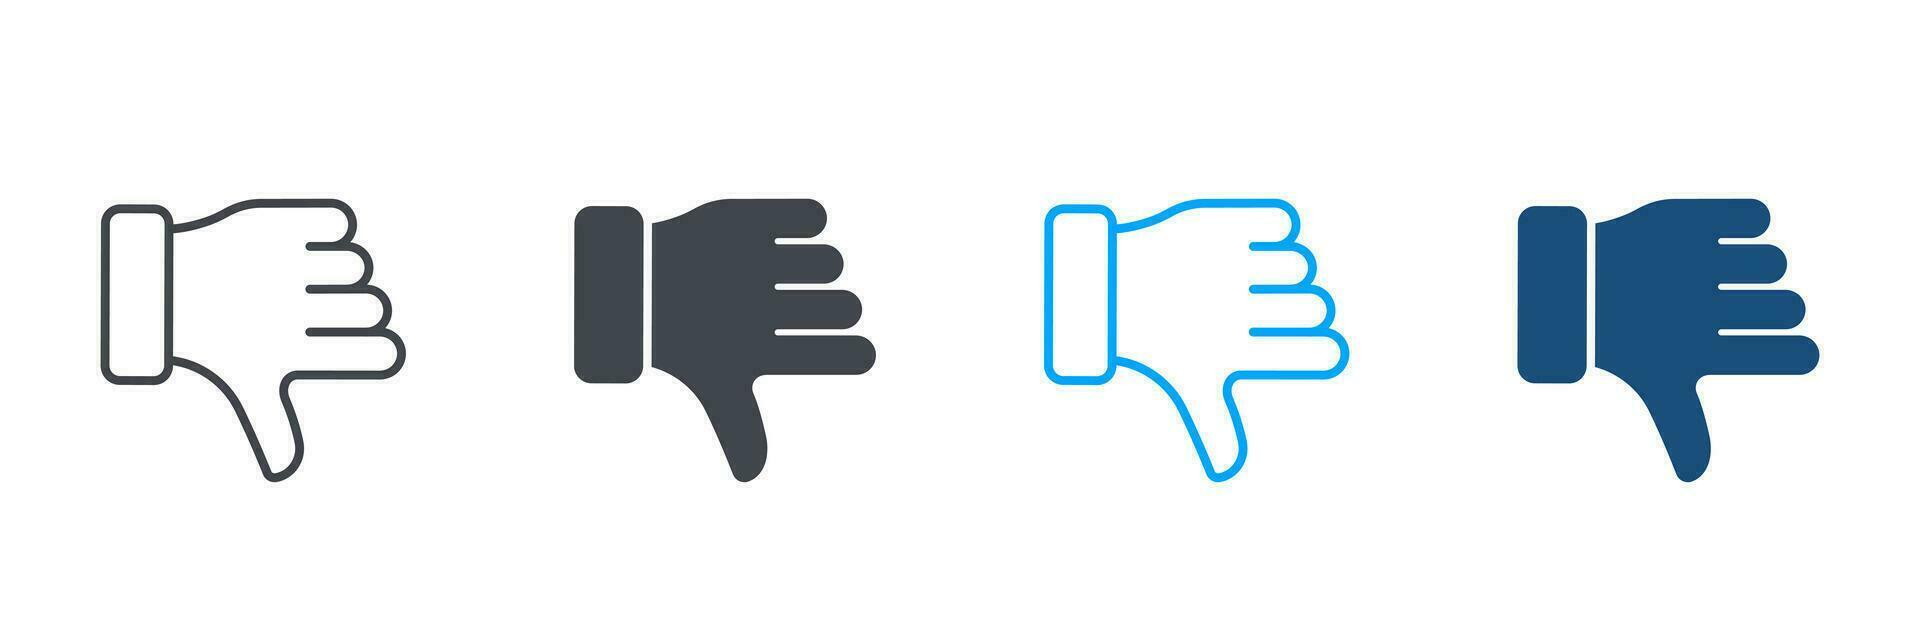 Thumb Down, Finger Down Pictogram. Dislike Gesture in Social Media Silhouette and Line Icon Set. Disapprove, Rejection, Negative Evaluation Symbol Collection. Isolated Vector Illustration.